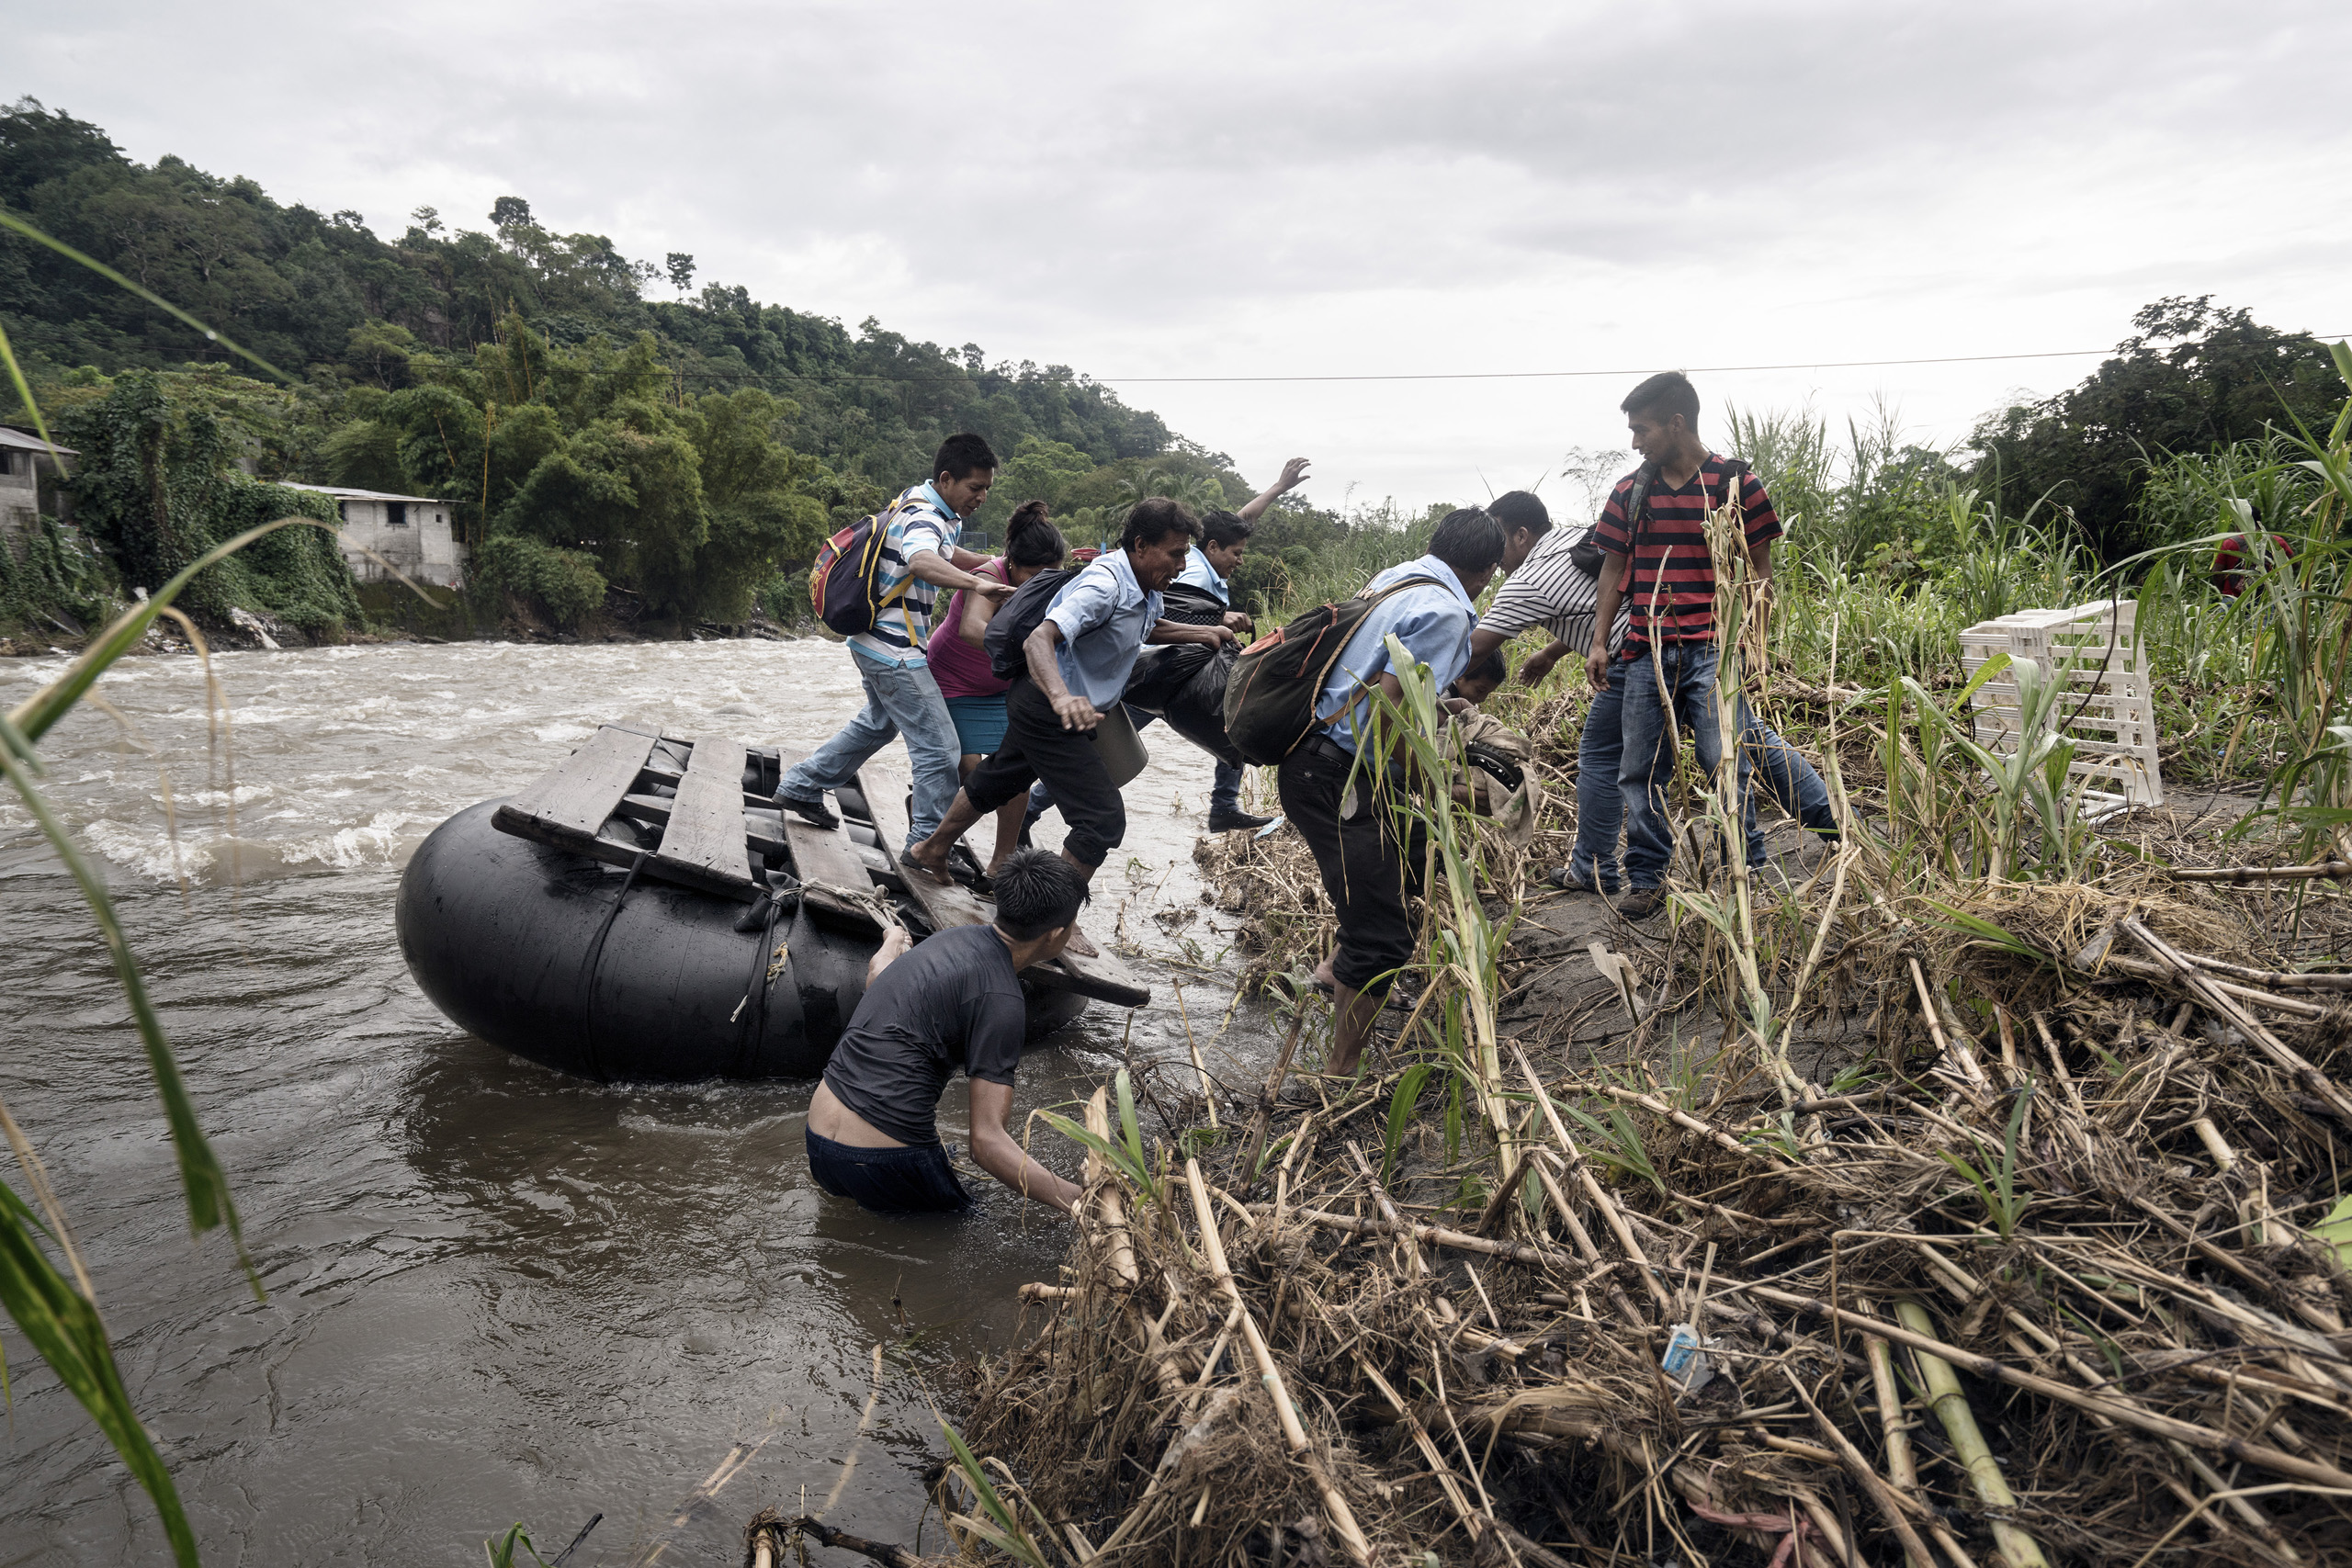 A group of undocumented Central American migrants rafting across the Suchiate River, which is the border between Mexico and Guatemala, illegally entering Mexico near the town of Talismàn. Chiapas, Mexico. Sept. 21, 2016.